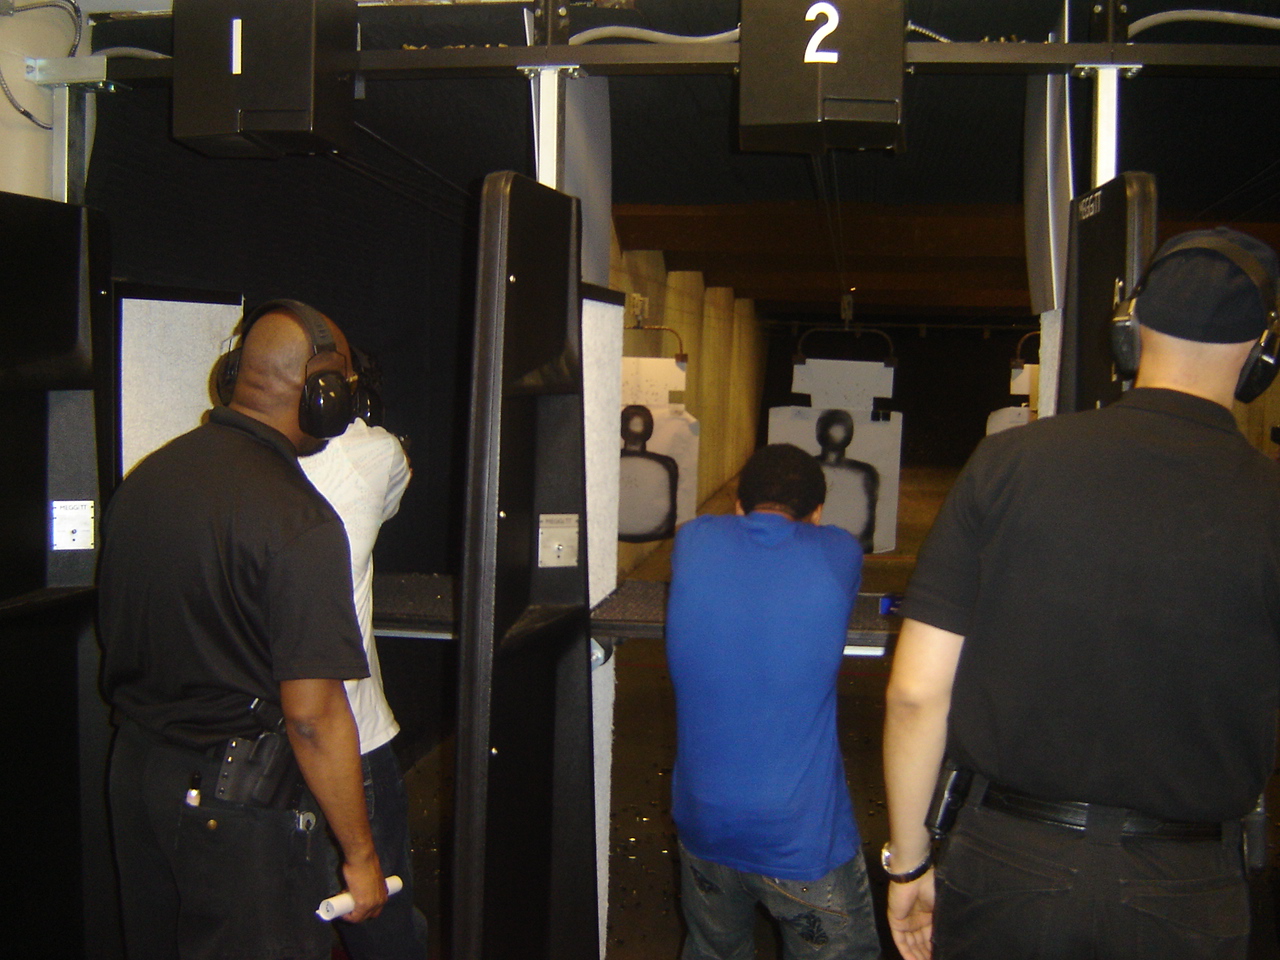 Instructors Leon S. Adams and Joseph Hibner give pointers to new shooters on the firing line